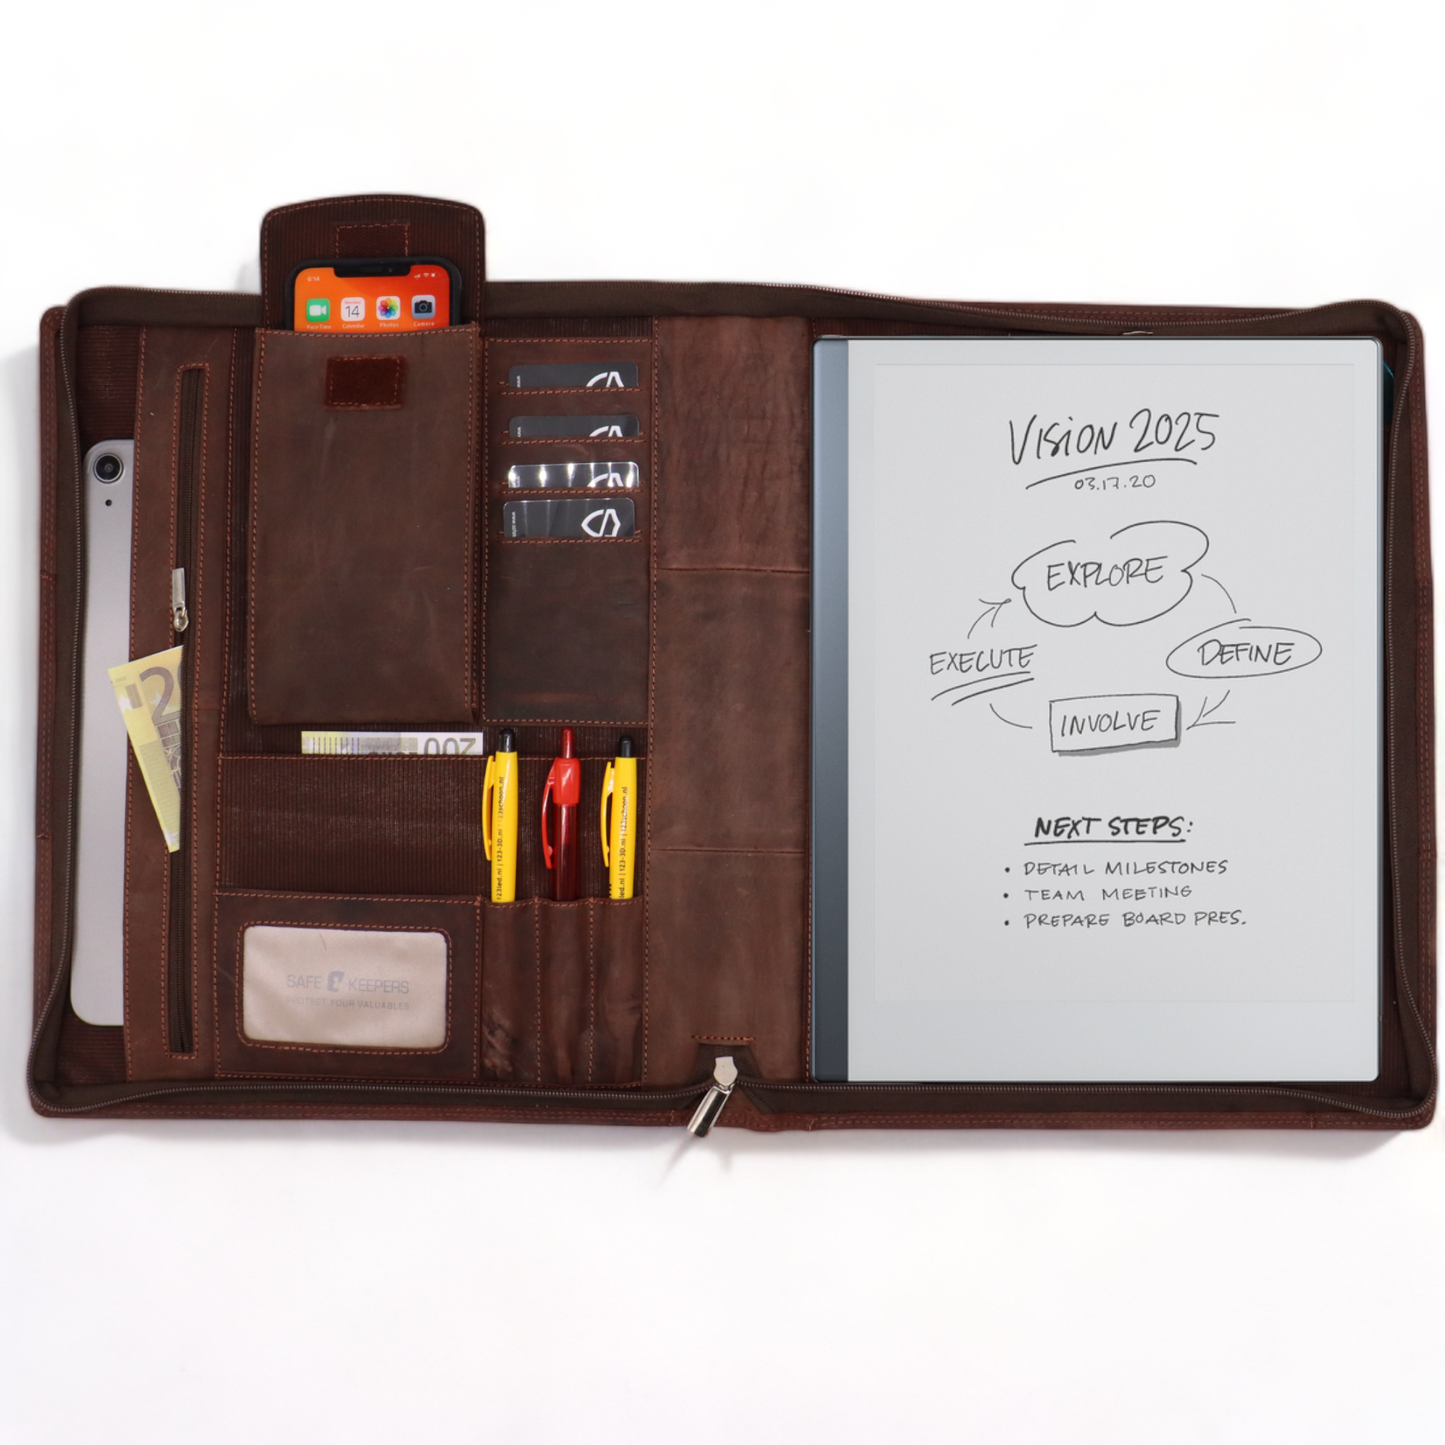 Writing cases A4 Ring binder - Document folder - Mobile bluetooth tracker finder Brown